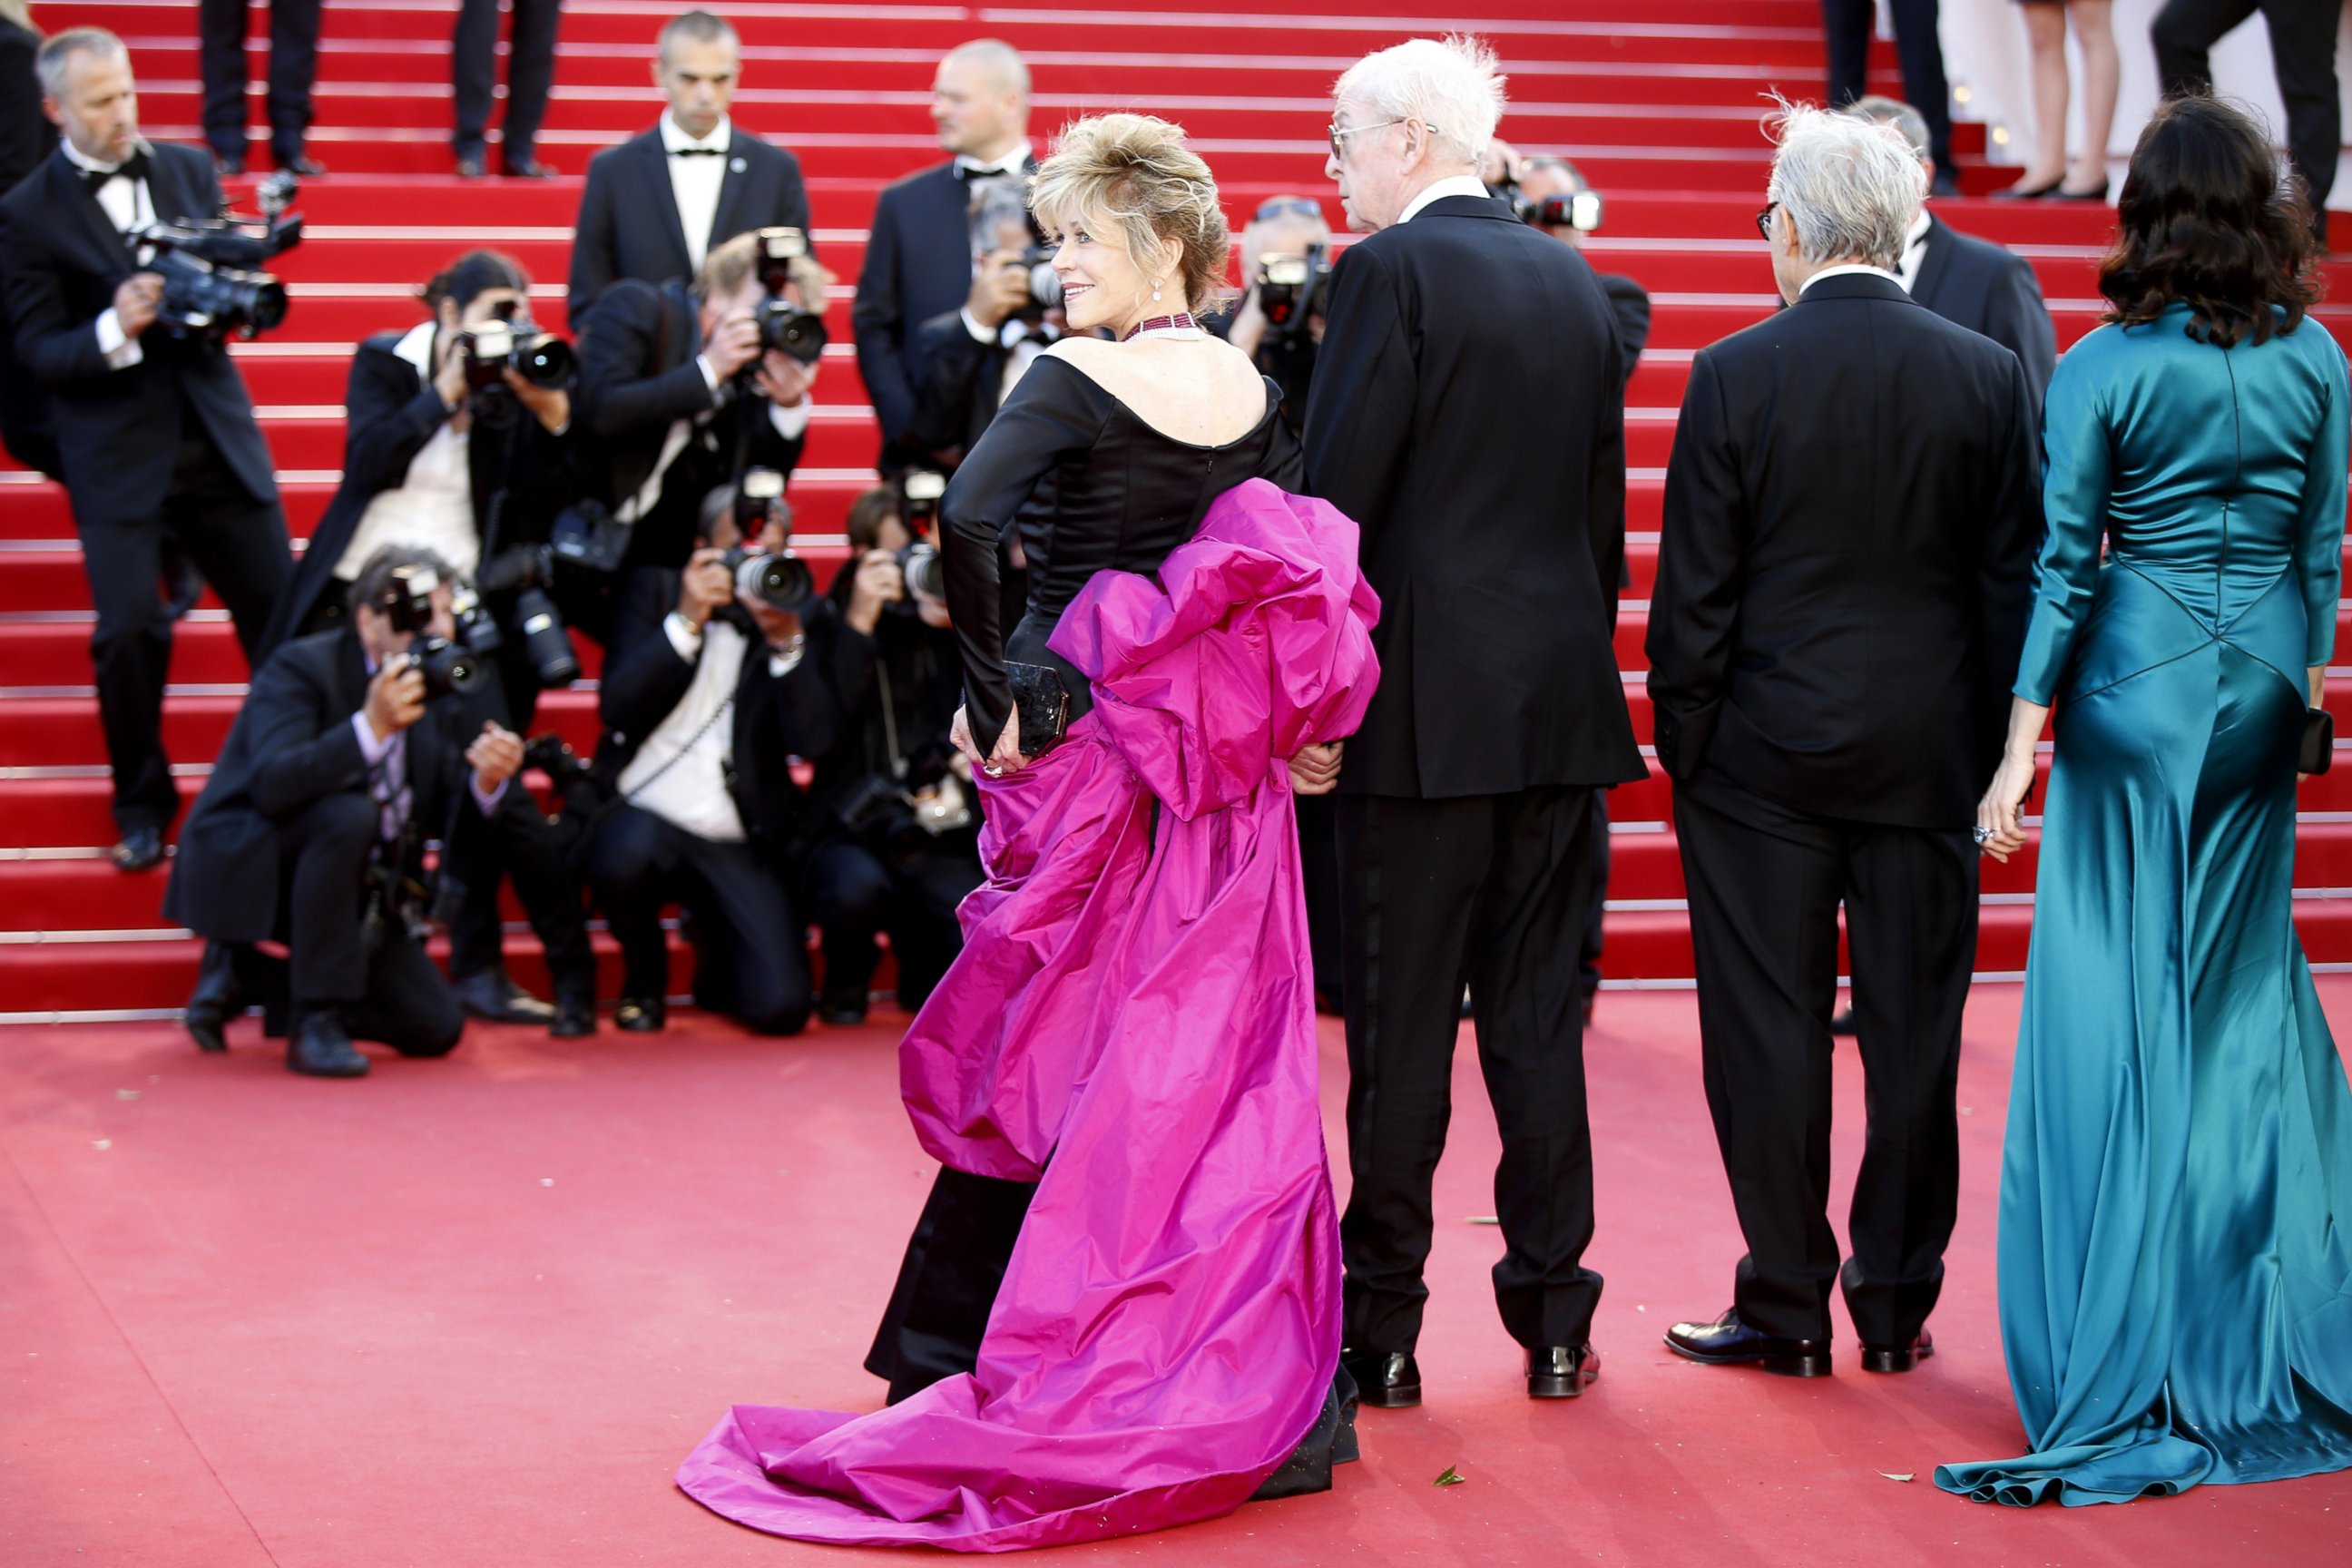 PHOTO: Jane Fonda, left, poses as she arrives for the screening of the film "Youth" at the 68th Cannes Film Festival in Cannes, France, on May 20, 2015.